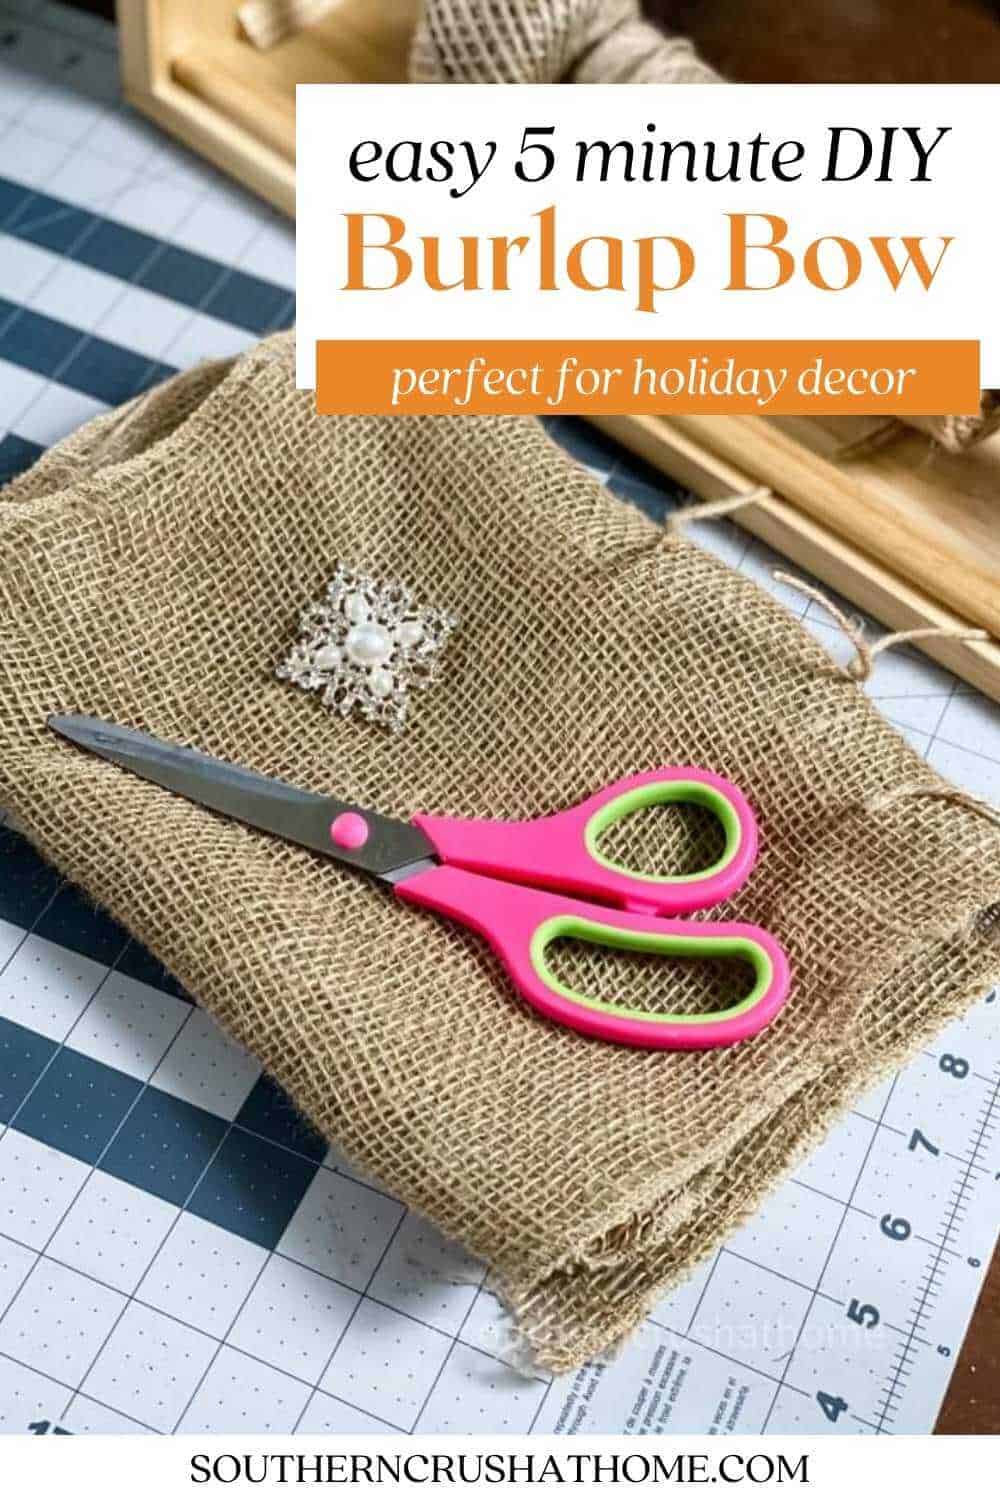 diy burlap bow pin image with text overlay